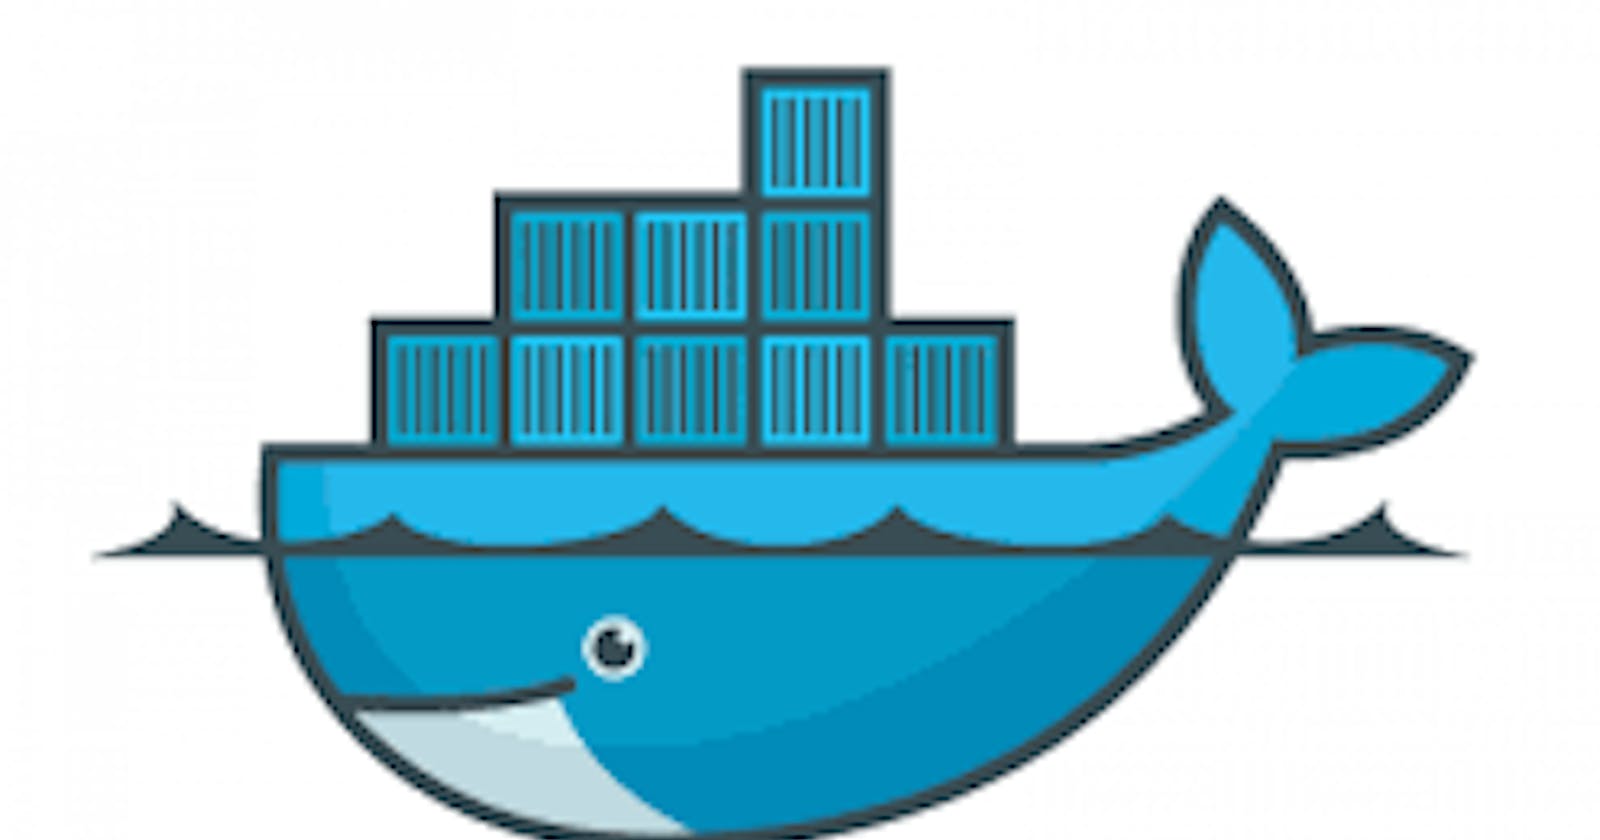 Docker: Launching Your First Container